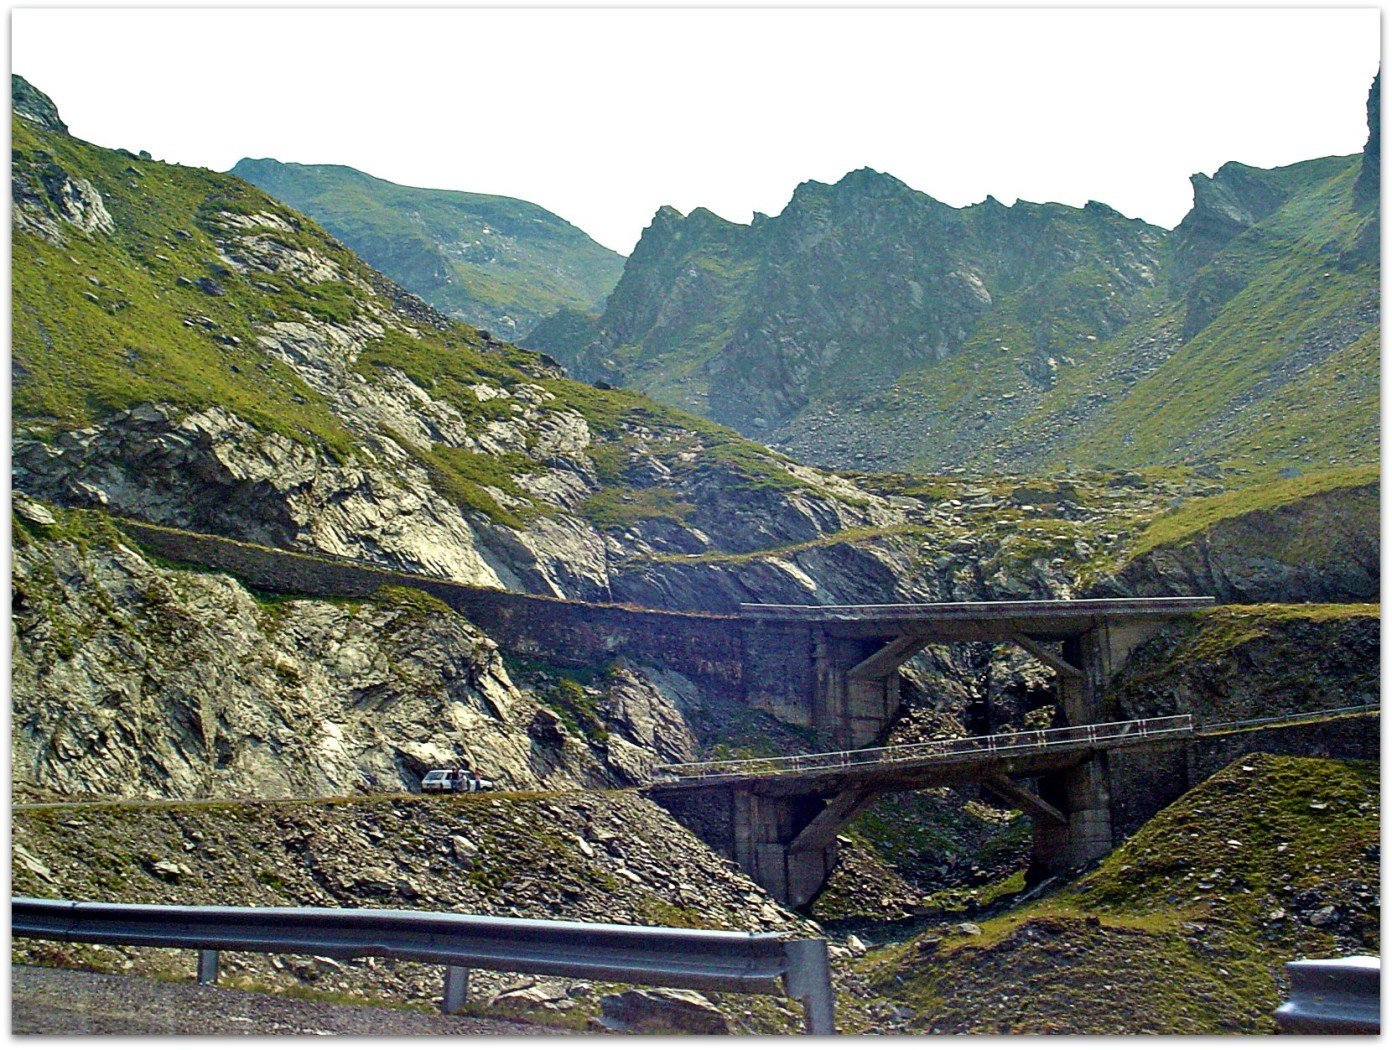 Serpentines up the mountains (Transfagarasan) from Balea Falls. Photo via Flickr Creative Commons by CameliaTWU